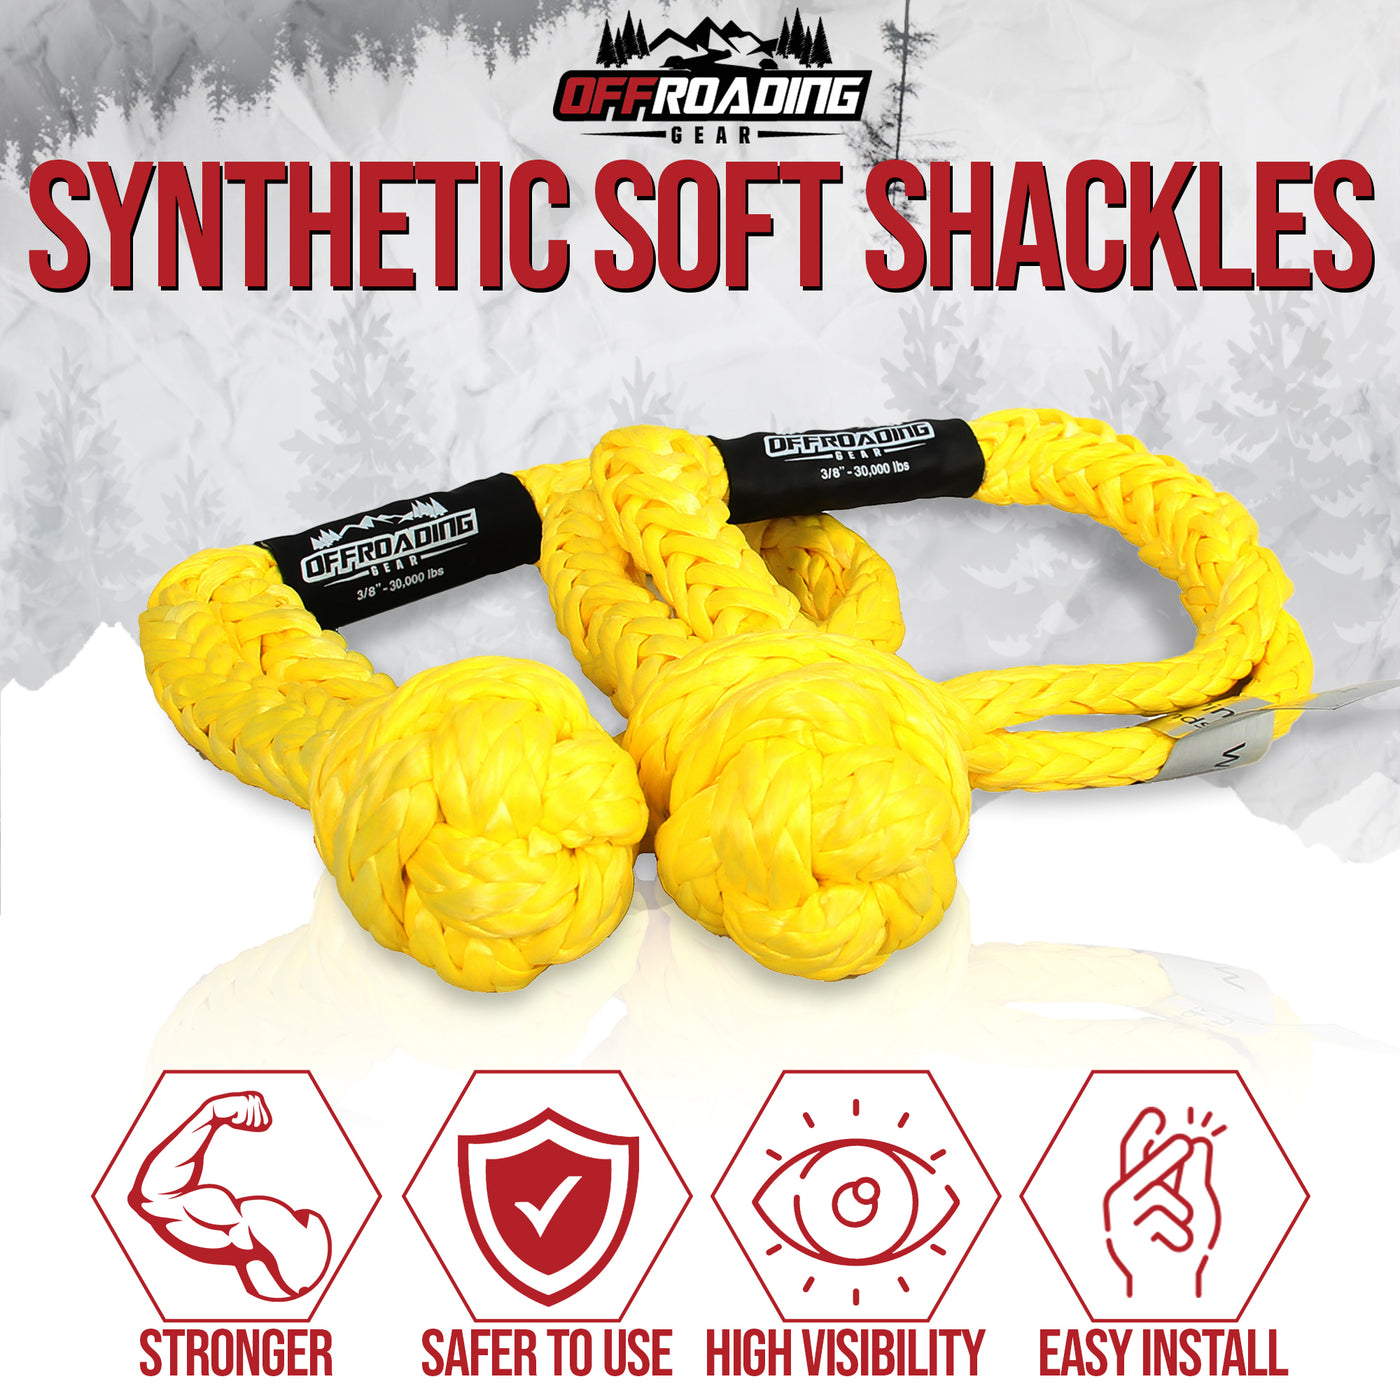 Offroading Gear Set of Two Synthetic Soft Rope Shackles w/Free Storage Bag